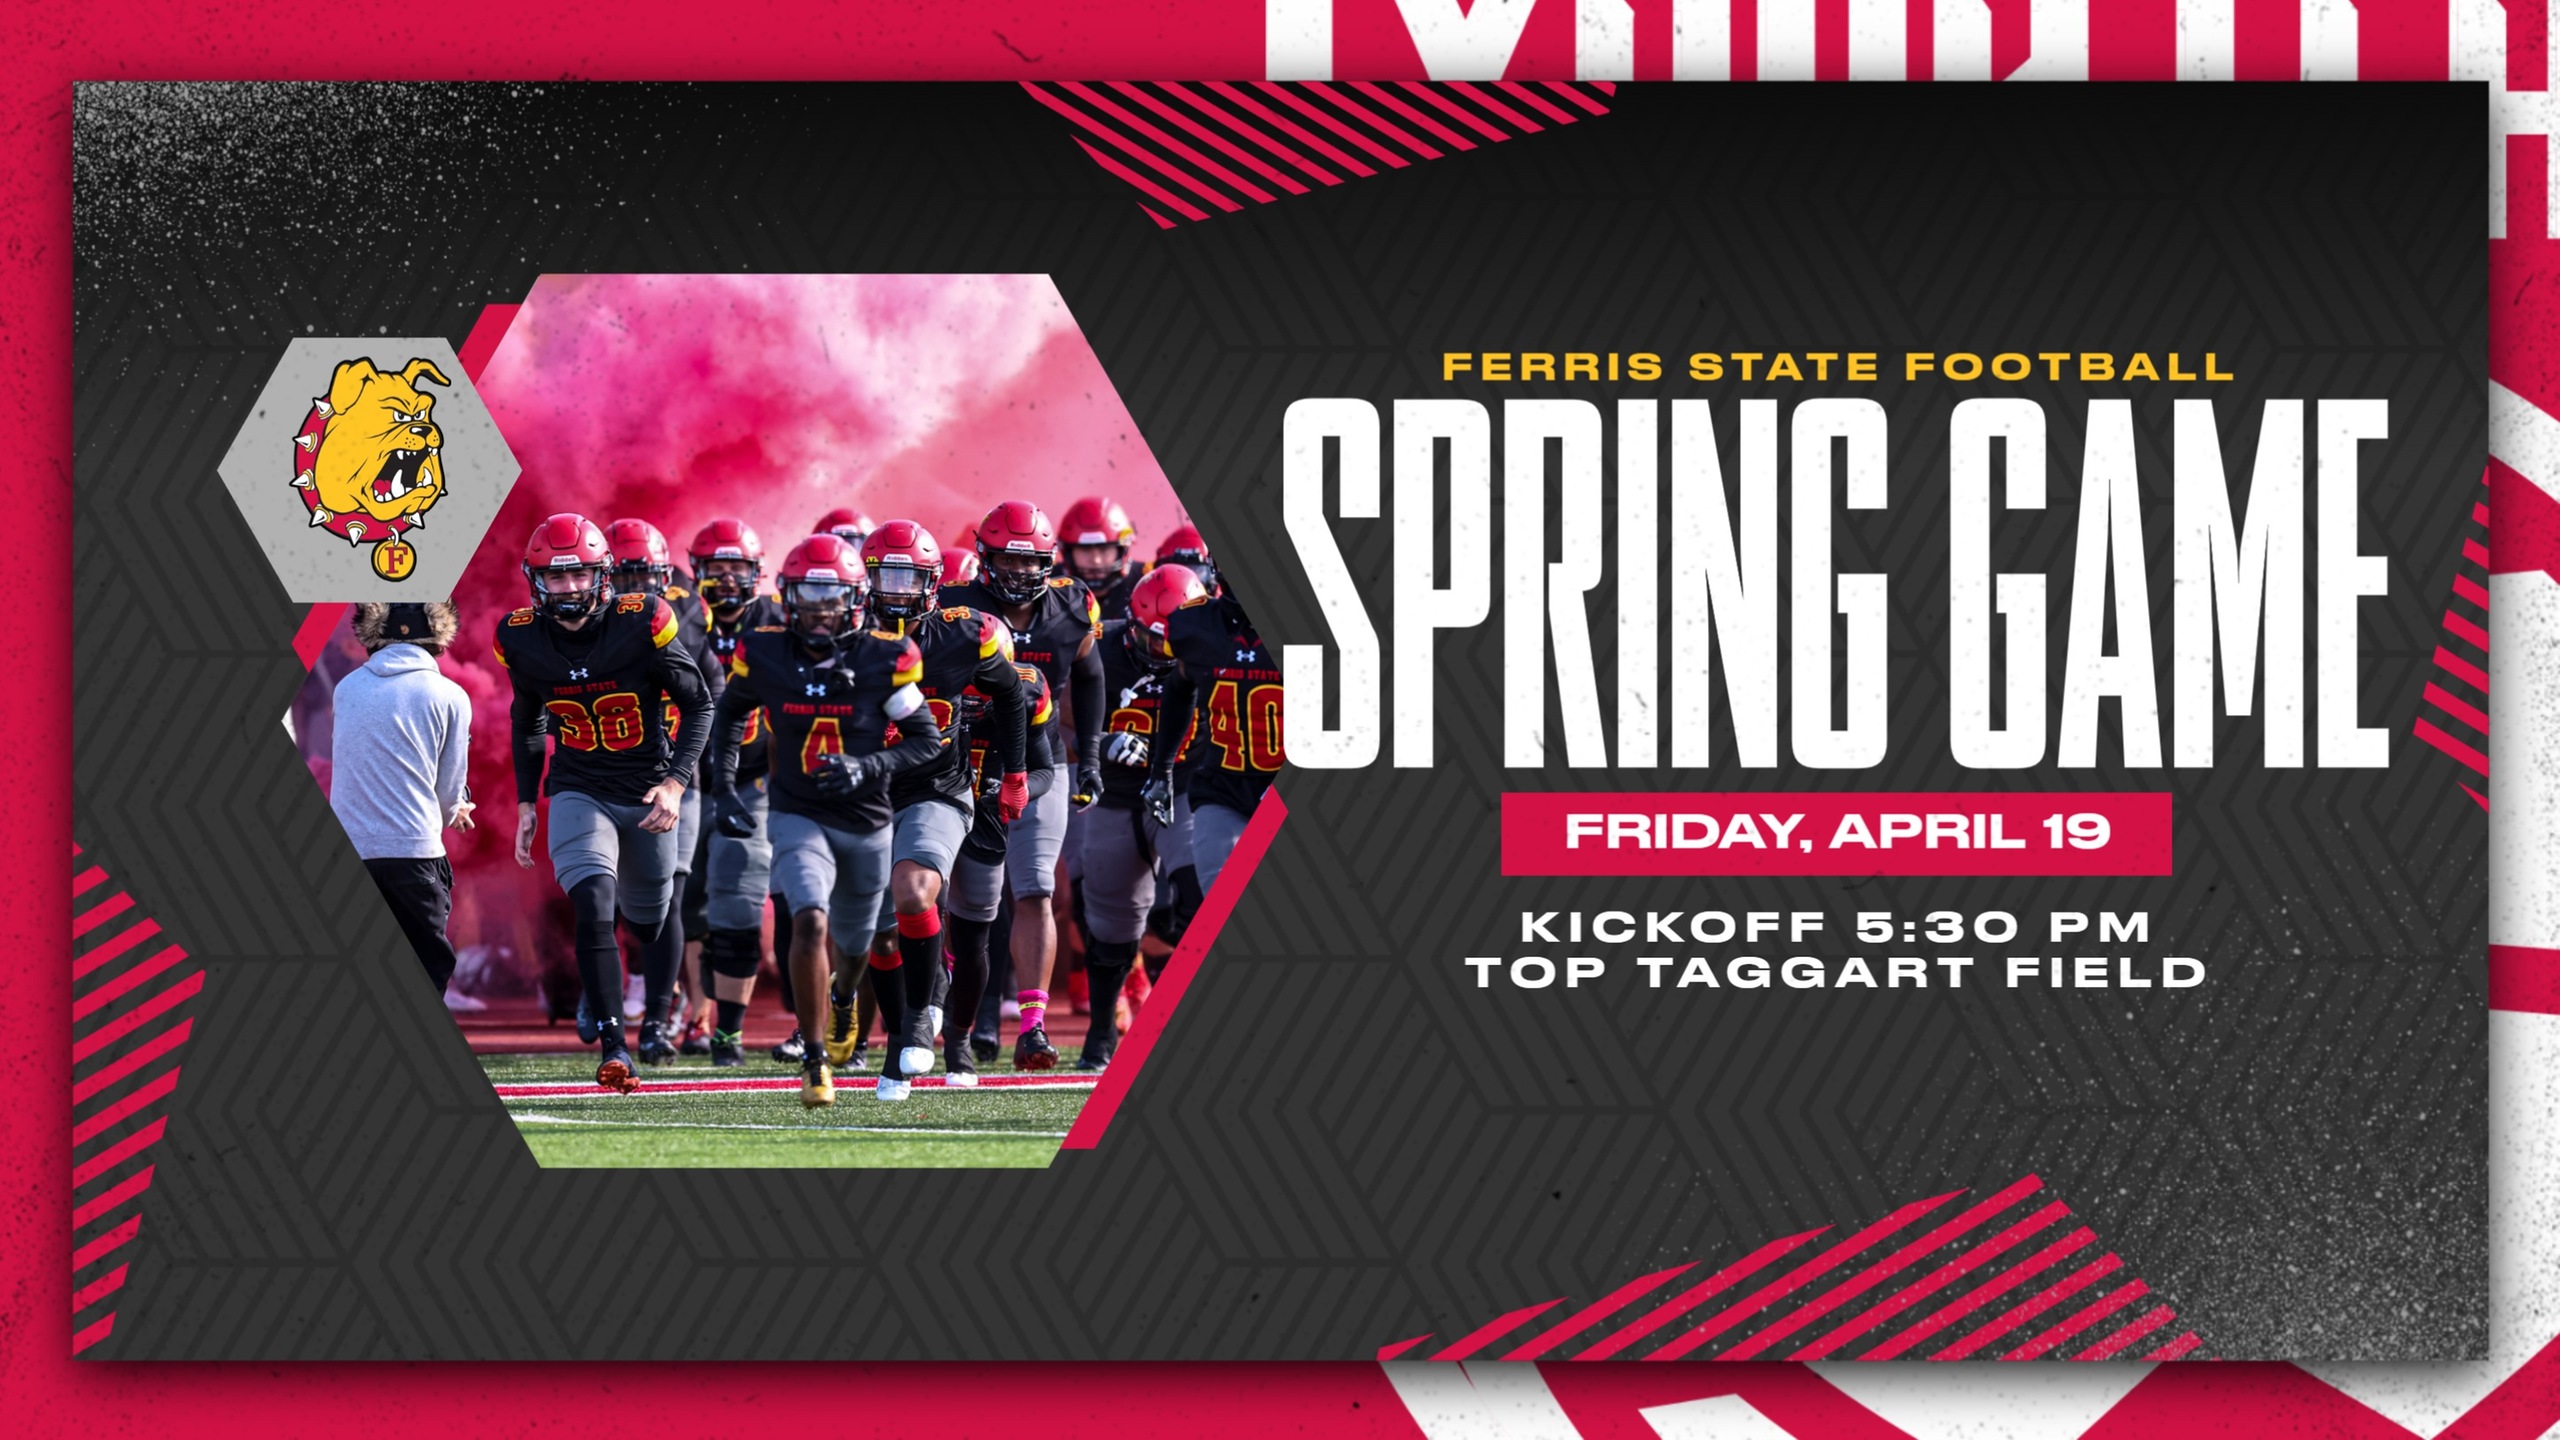 Ferris State Football Spring Game This Friday Evening At Top Taggart Field